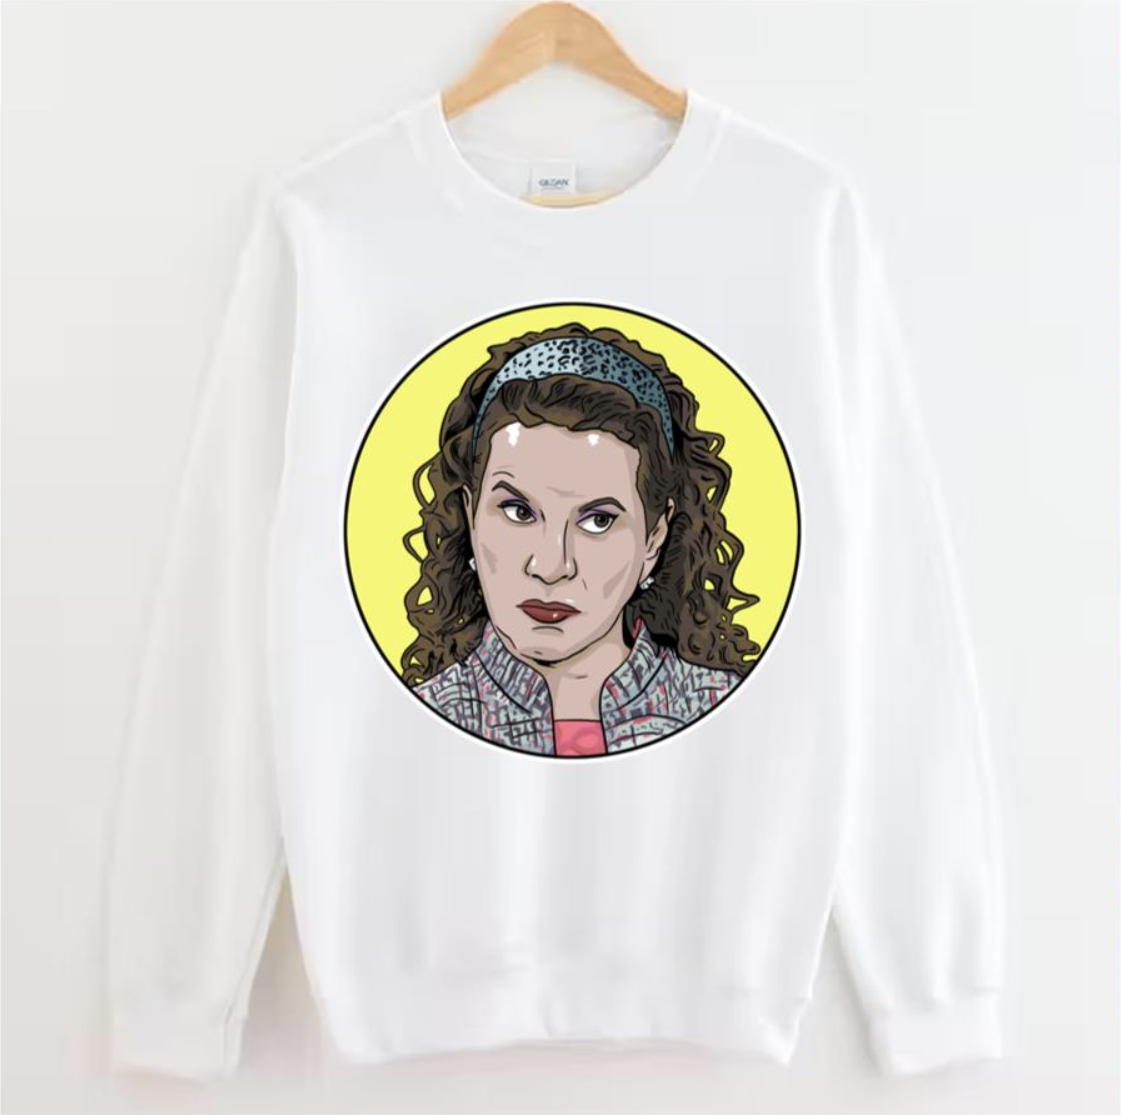 Susie Greene From Curb Your Enthusiasm shirt